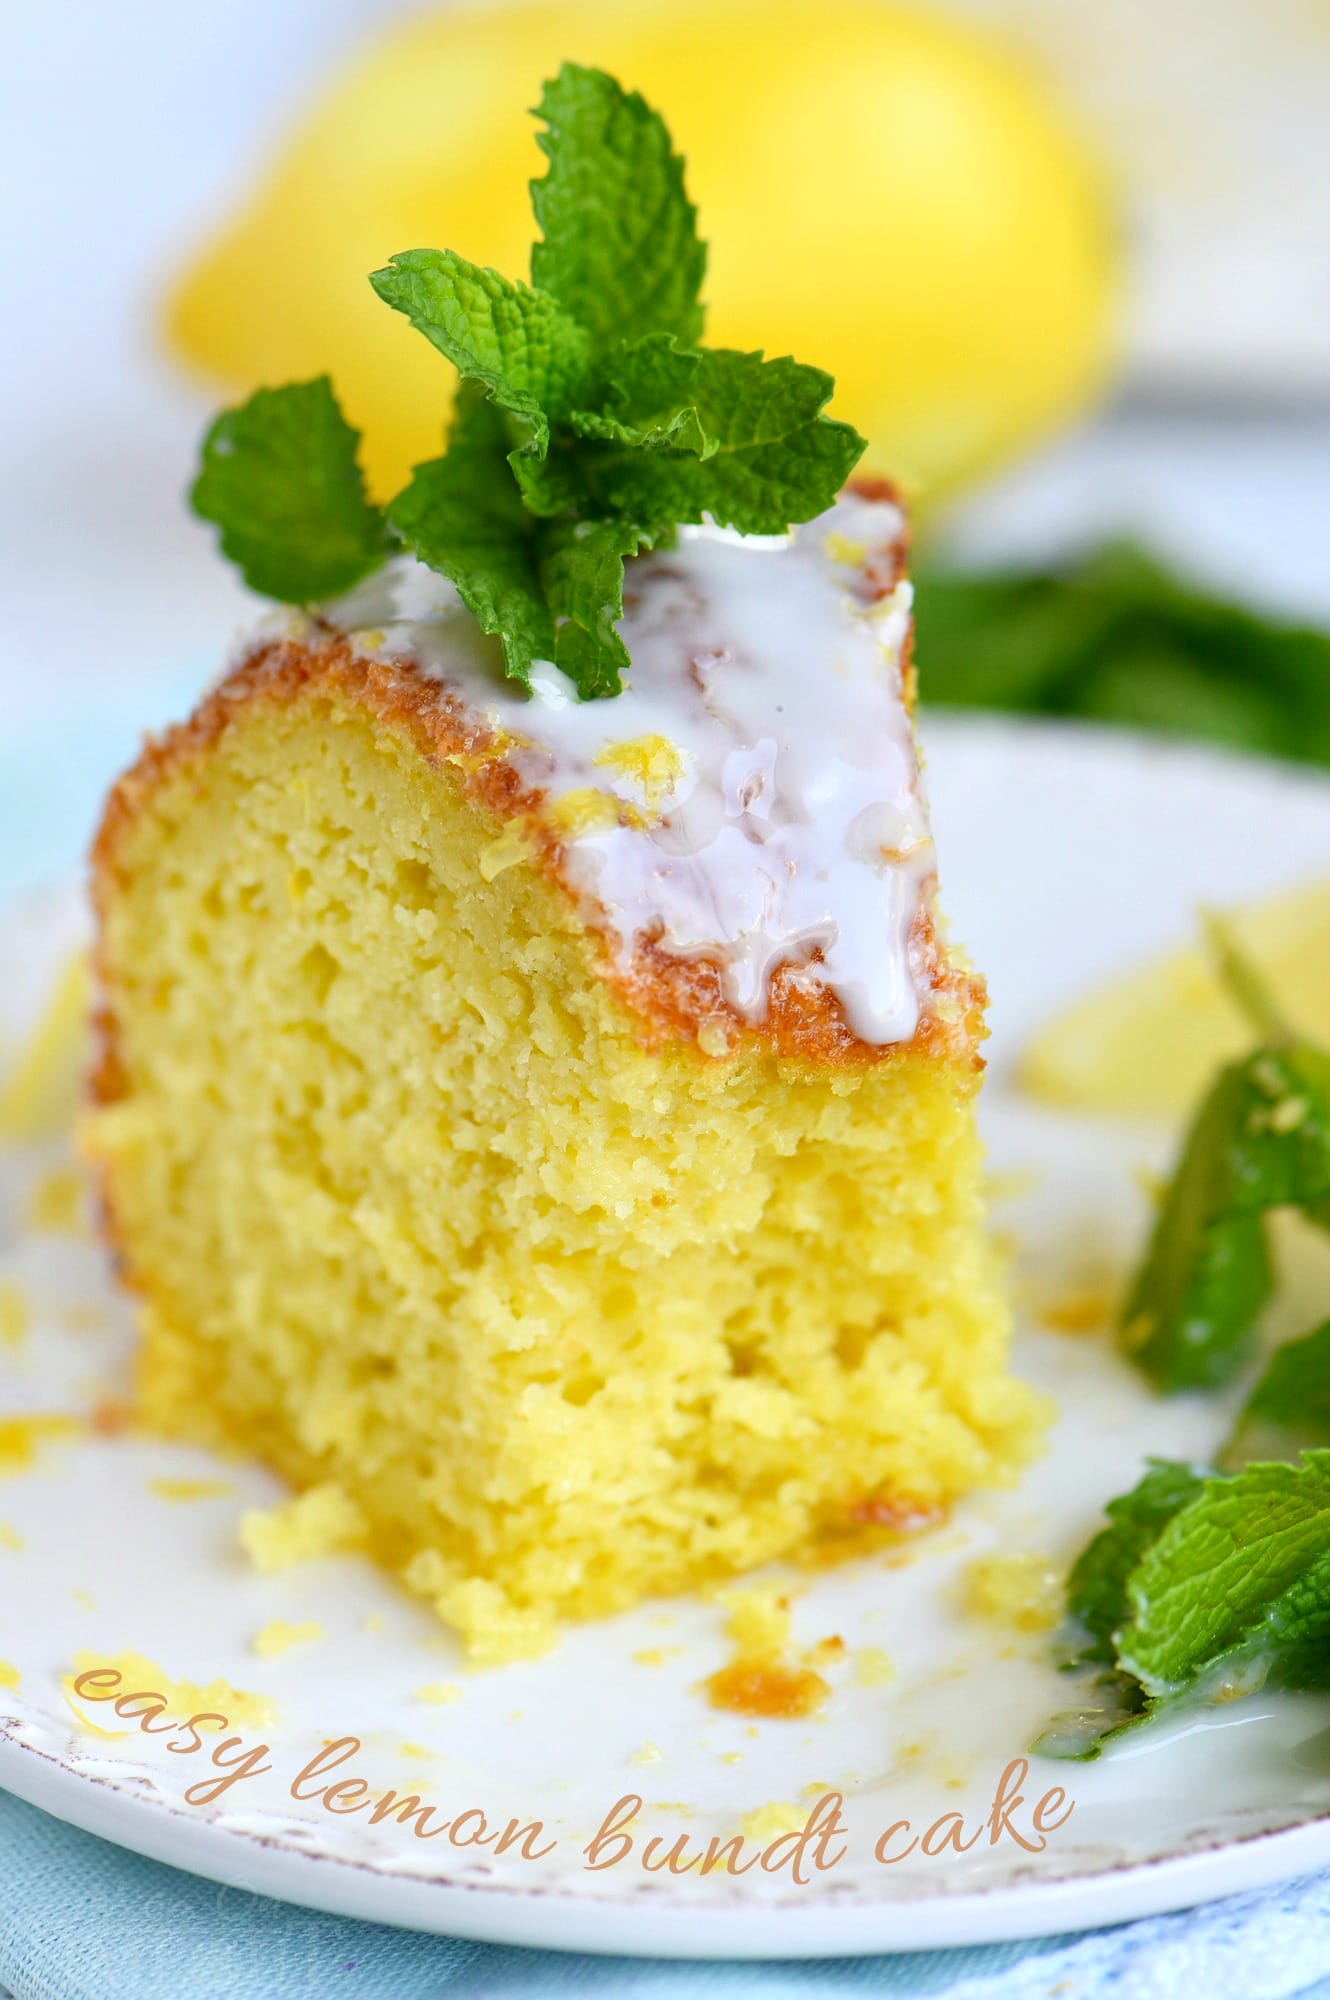 Looking for an easy lemon dessert recipe that is going to WOW your friends and family? This Easy Lemon Bundt Cake is the answer! A breeze to make and loaded with bright lemon flavor, this easy cake recipe is also figure-friendly which makes it perfect for summer! // Mom On Timeout